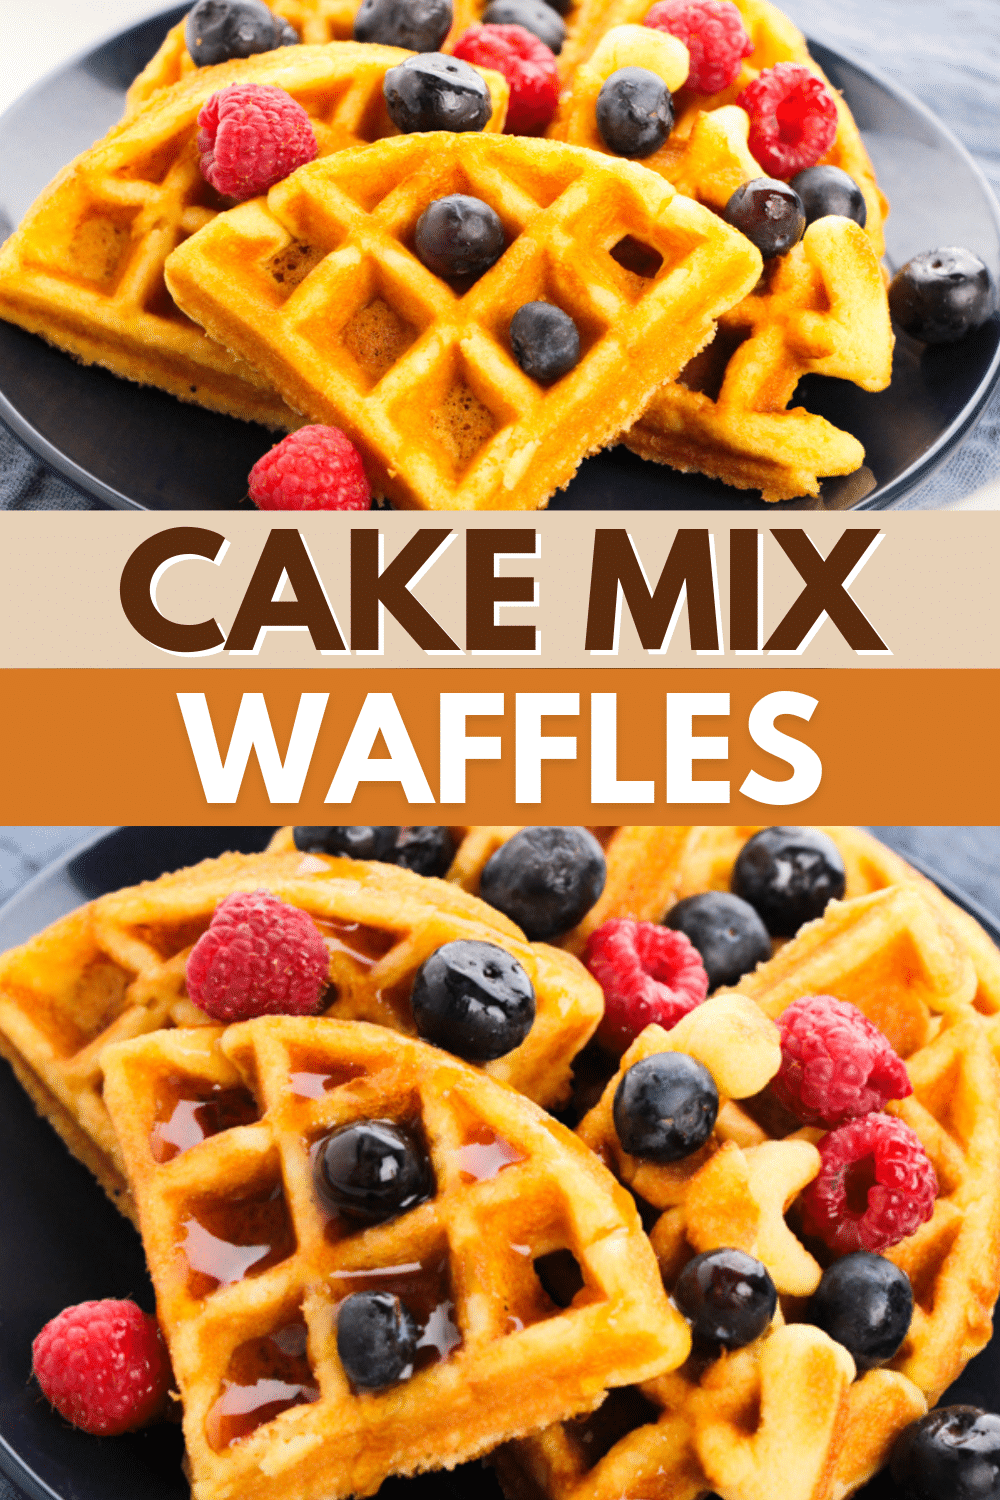 These Cake Mix Waffles are the perfect way to start your morning! They are light. fluffy, flavorful and made with a few simple ingredients. #cakemixwaffles #wafflemakers #cakebatterwaffles #birthdaybreakfast #breakfastrecipe via @wondermomwannab